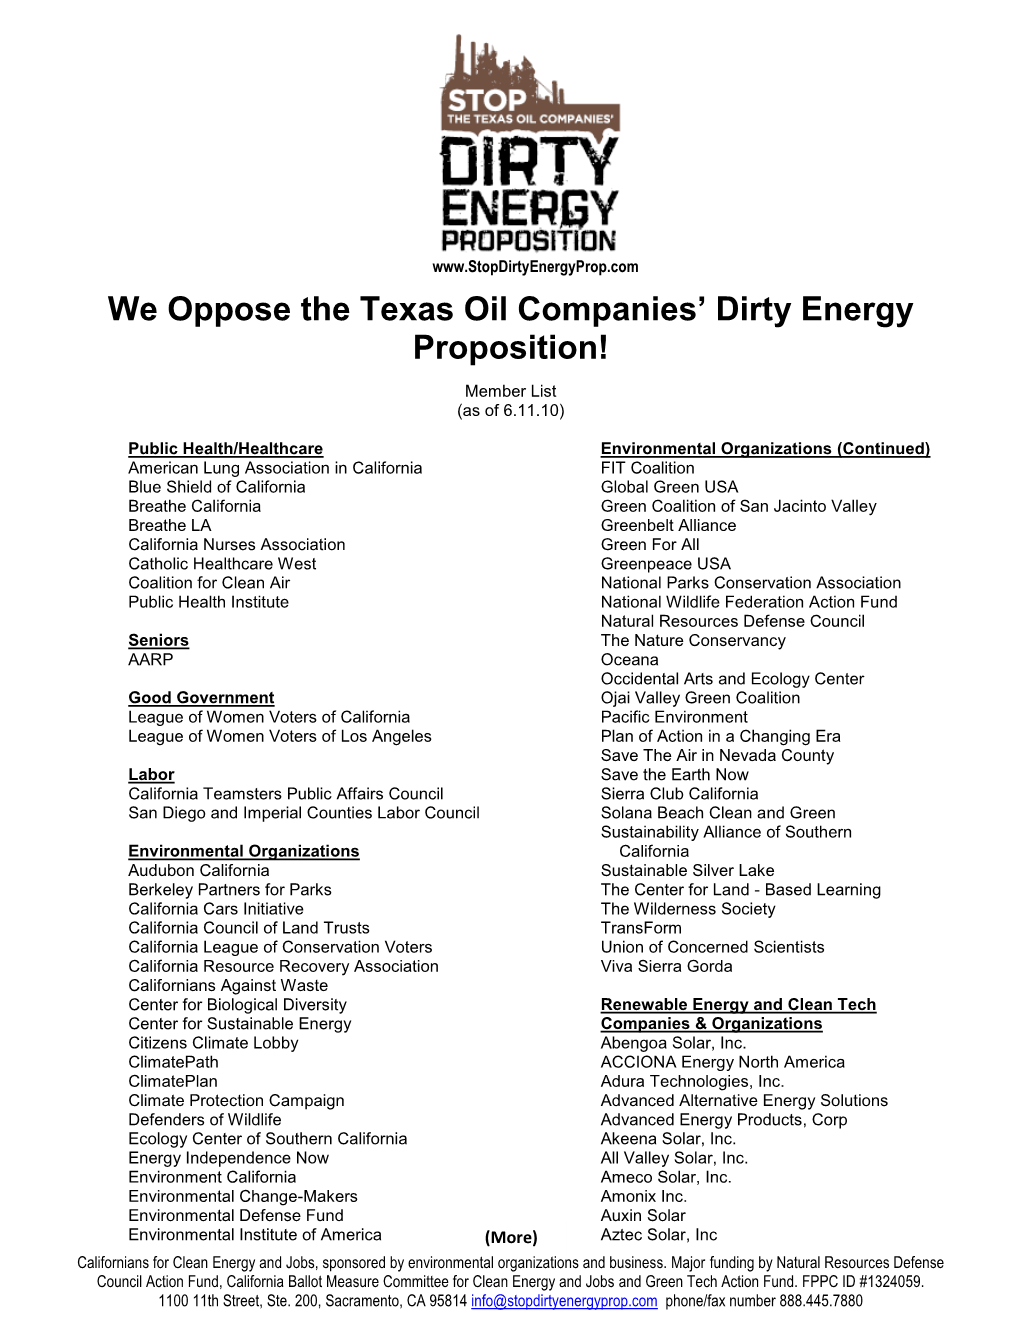 We Oppose the Texas Oil Companies' Dirty Energy Proposition!